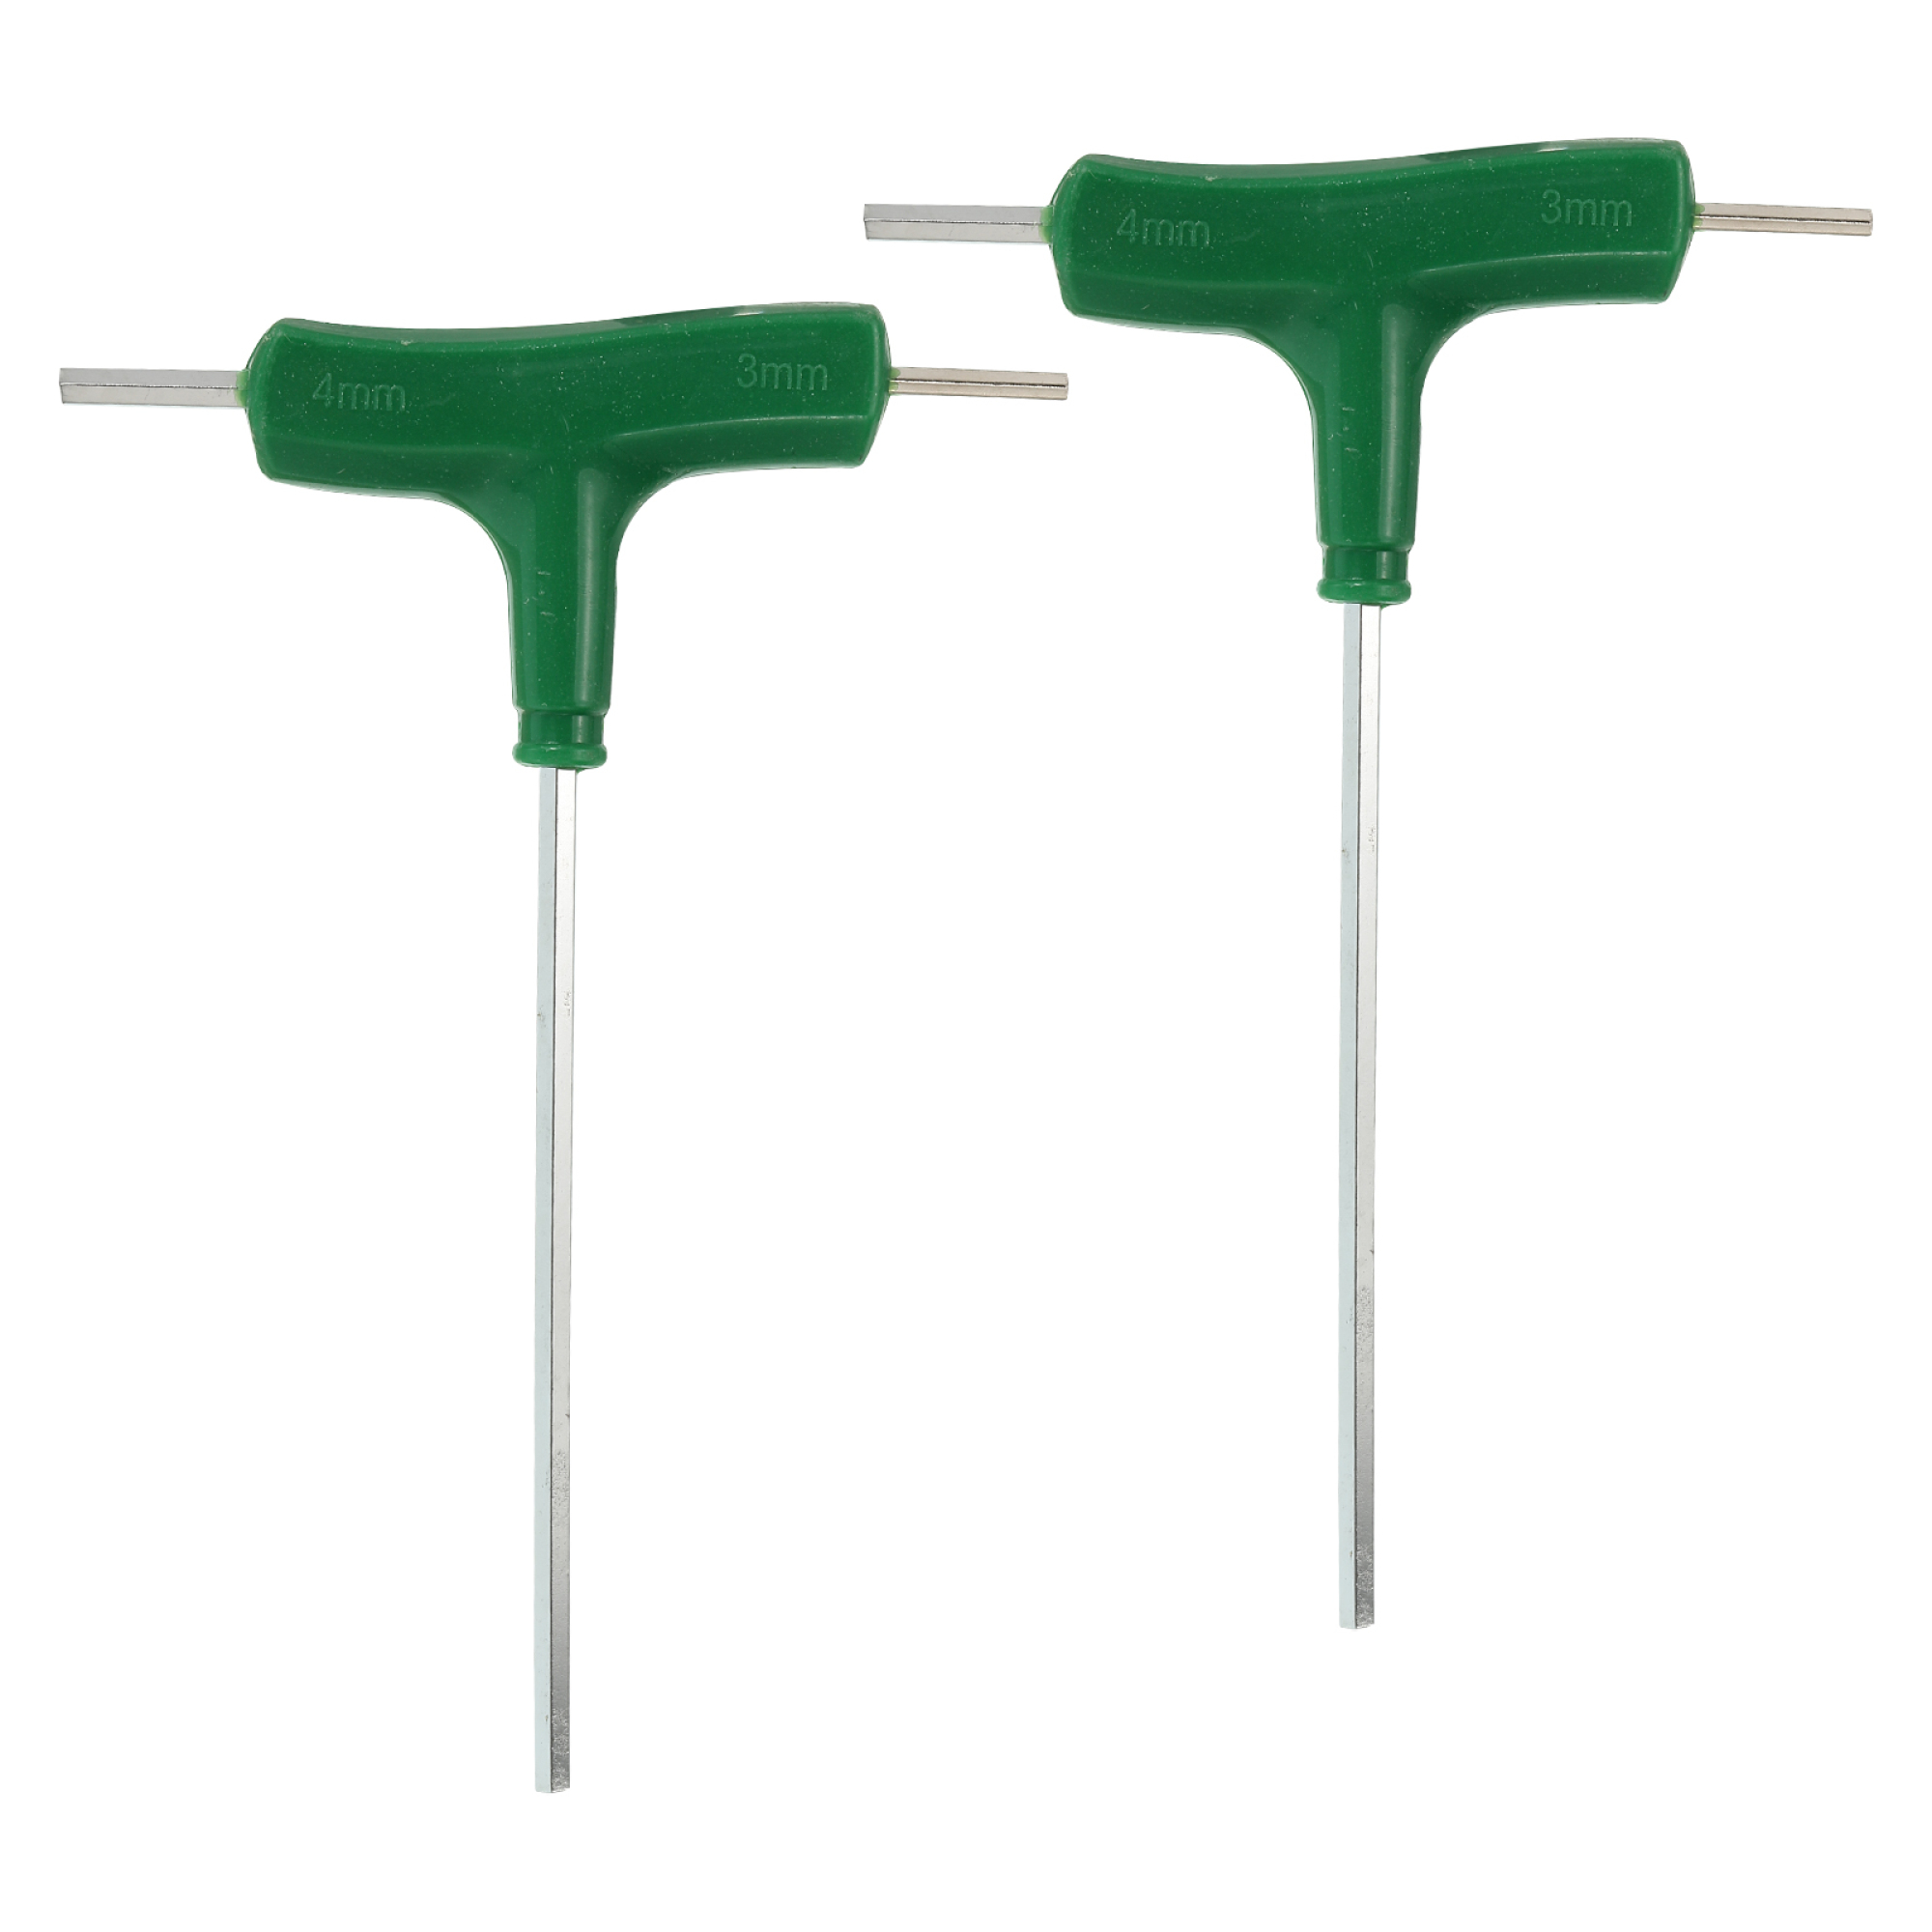 T-Handle Three-Way Hex Wrench Set 3mm/4mm, Green